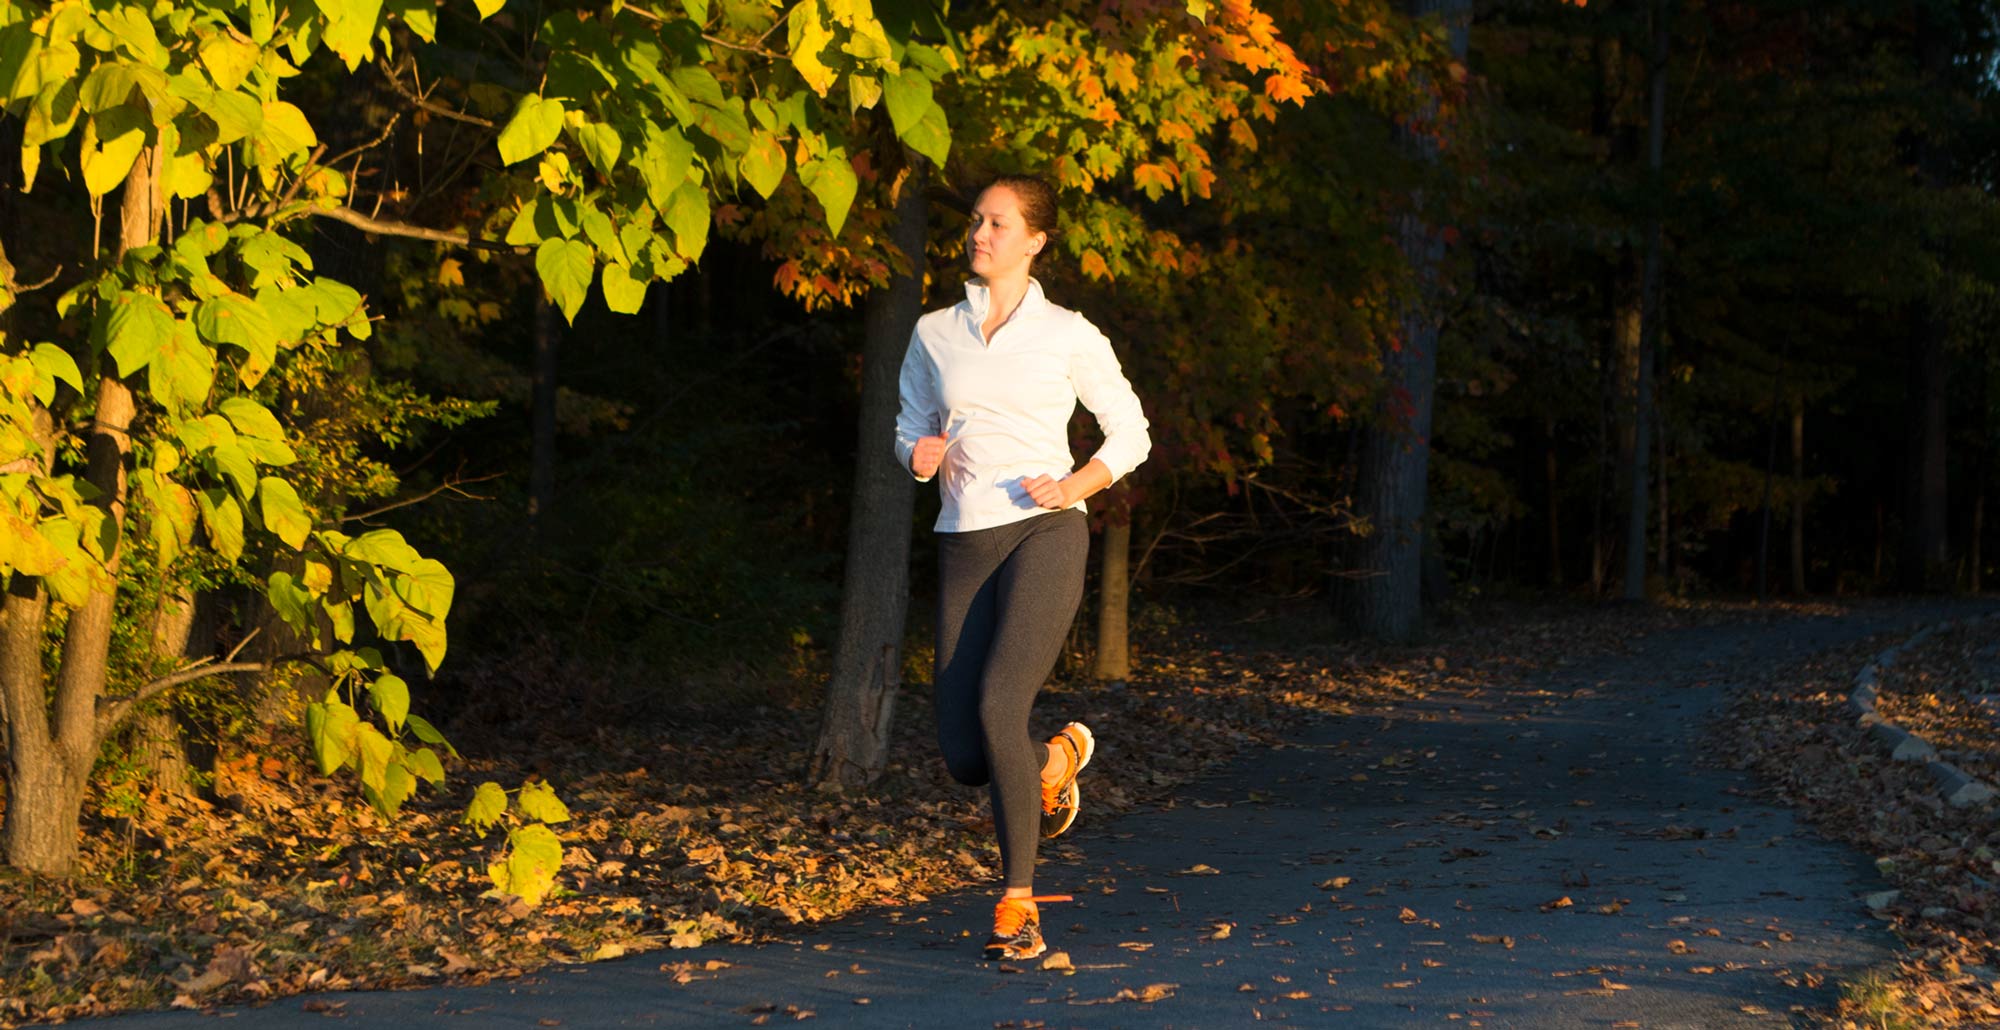 A jogger uses the Green Monster under the changing fall leaves.